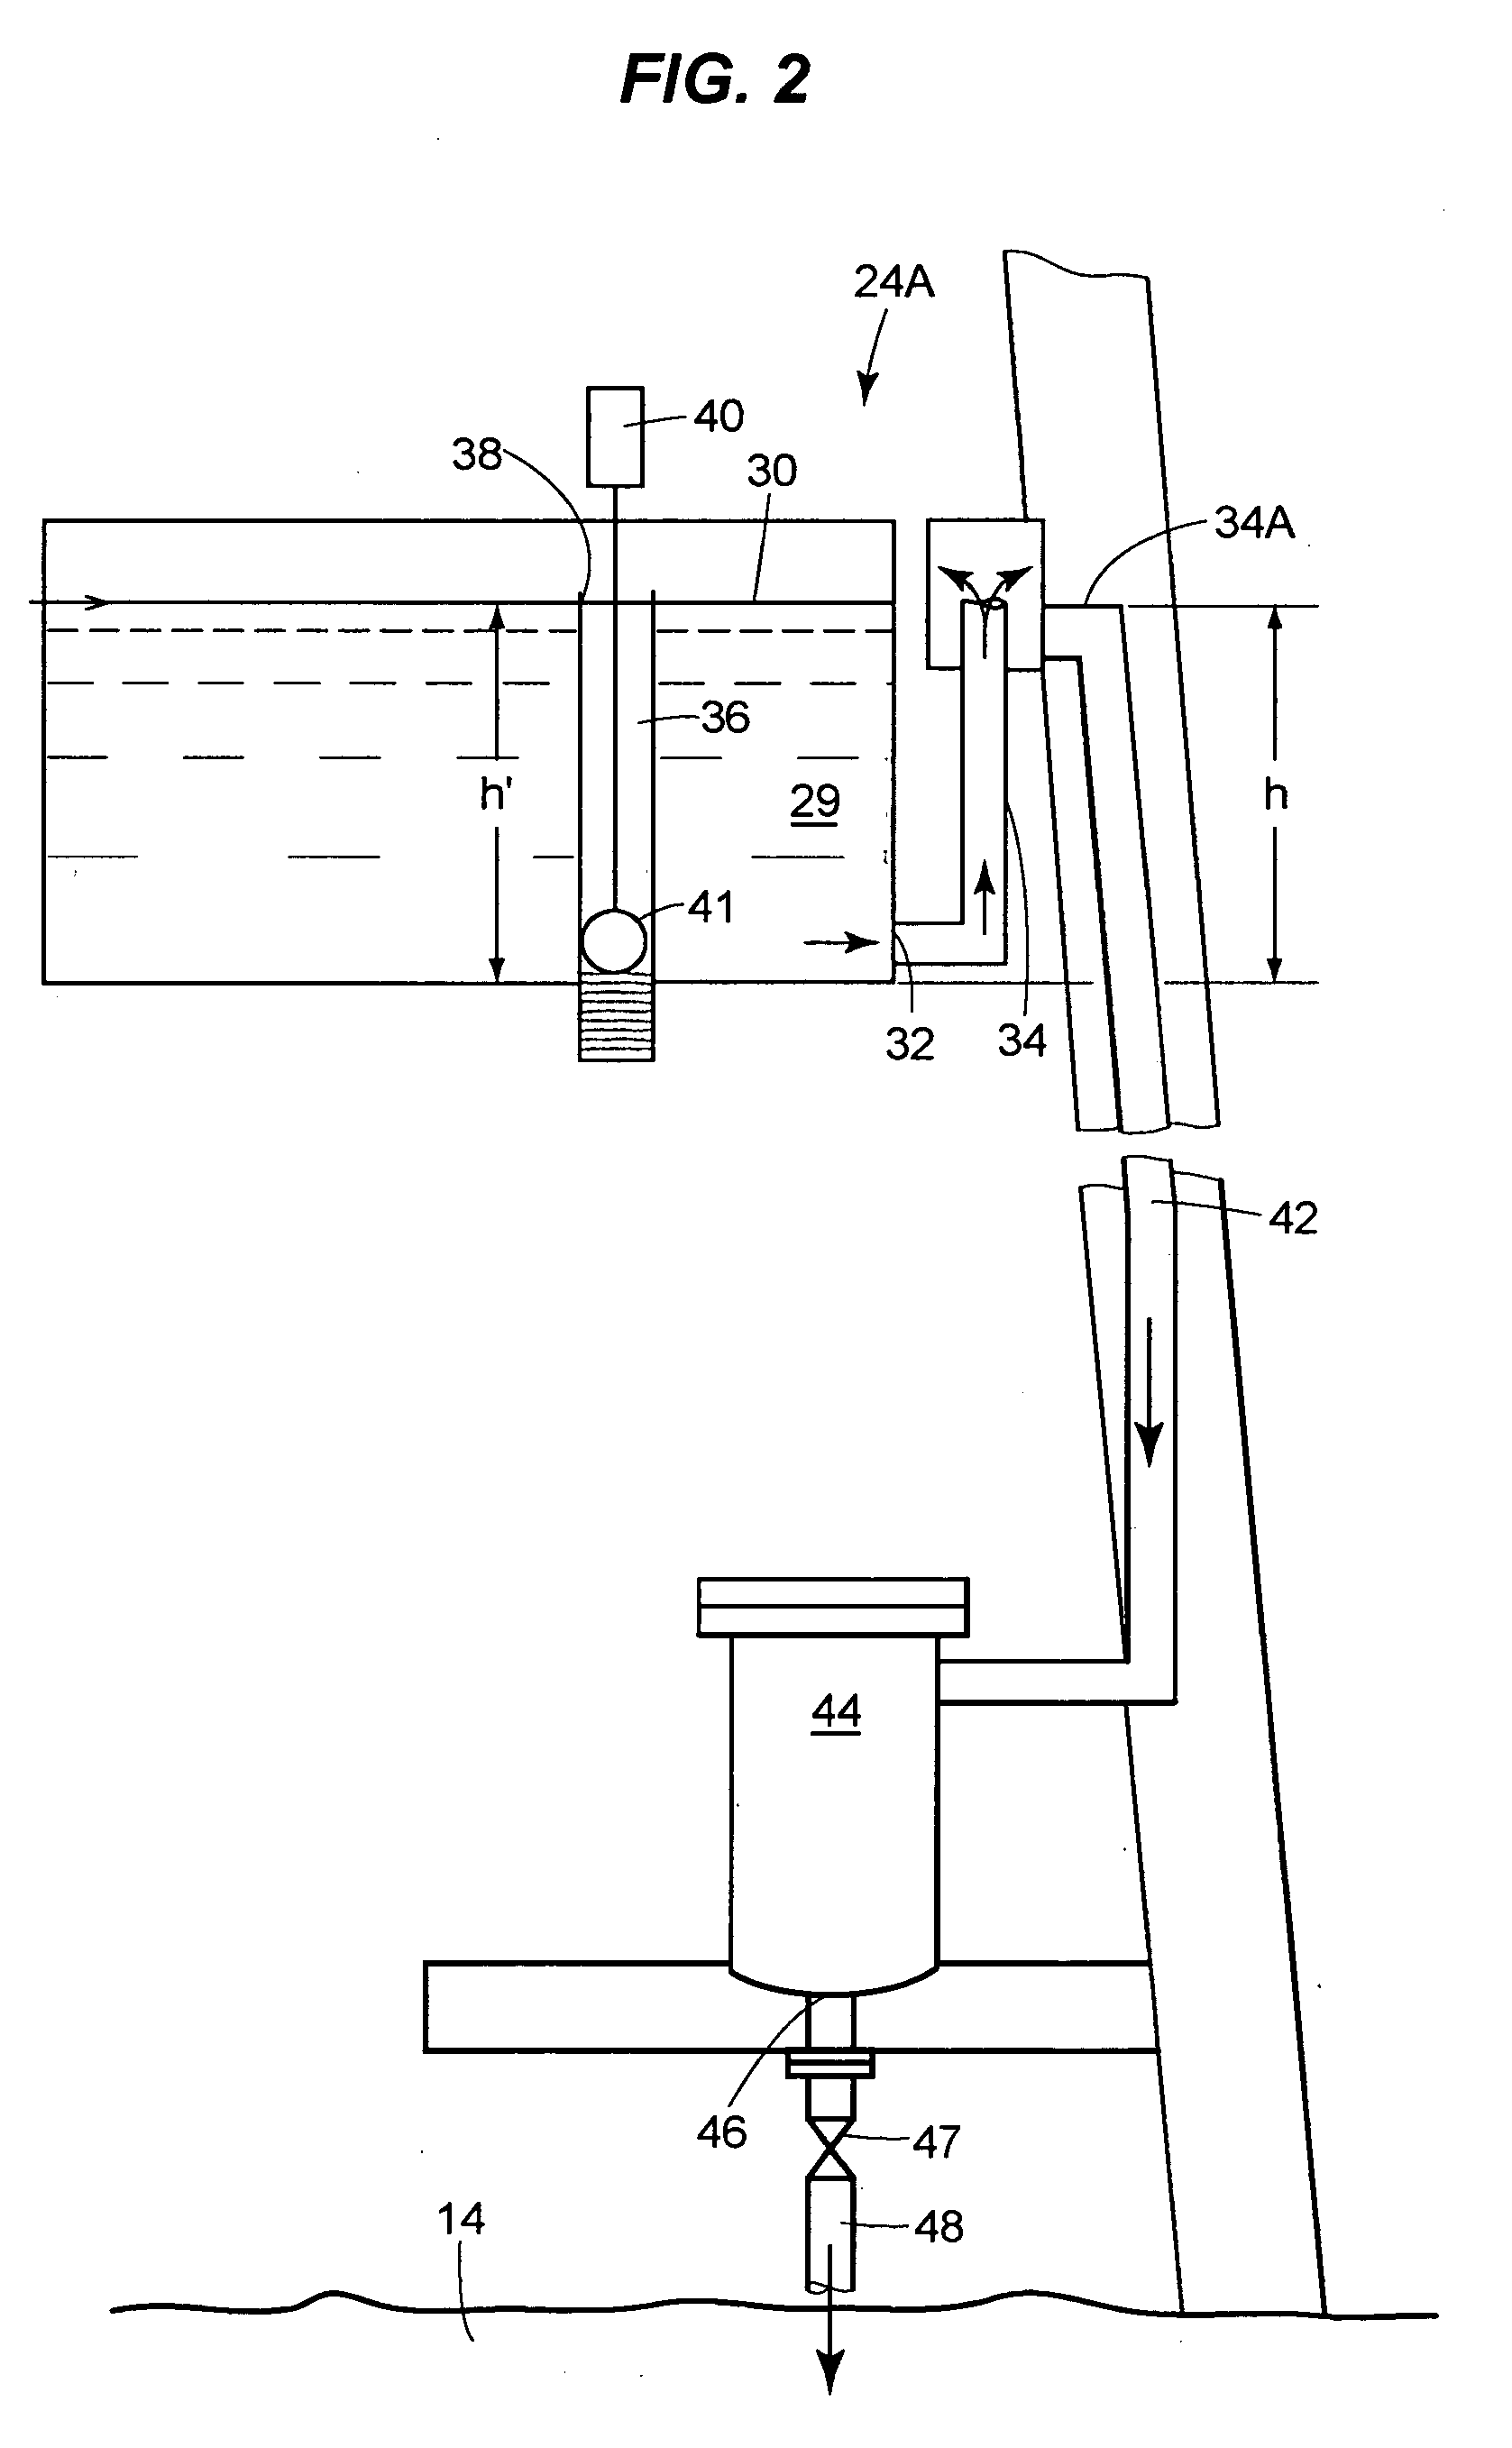 Method for removing oil from water coalescing in a polymer particle/fiber media